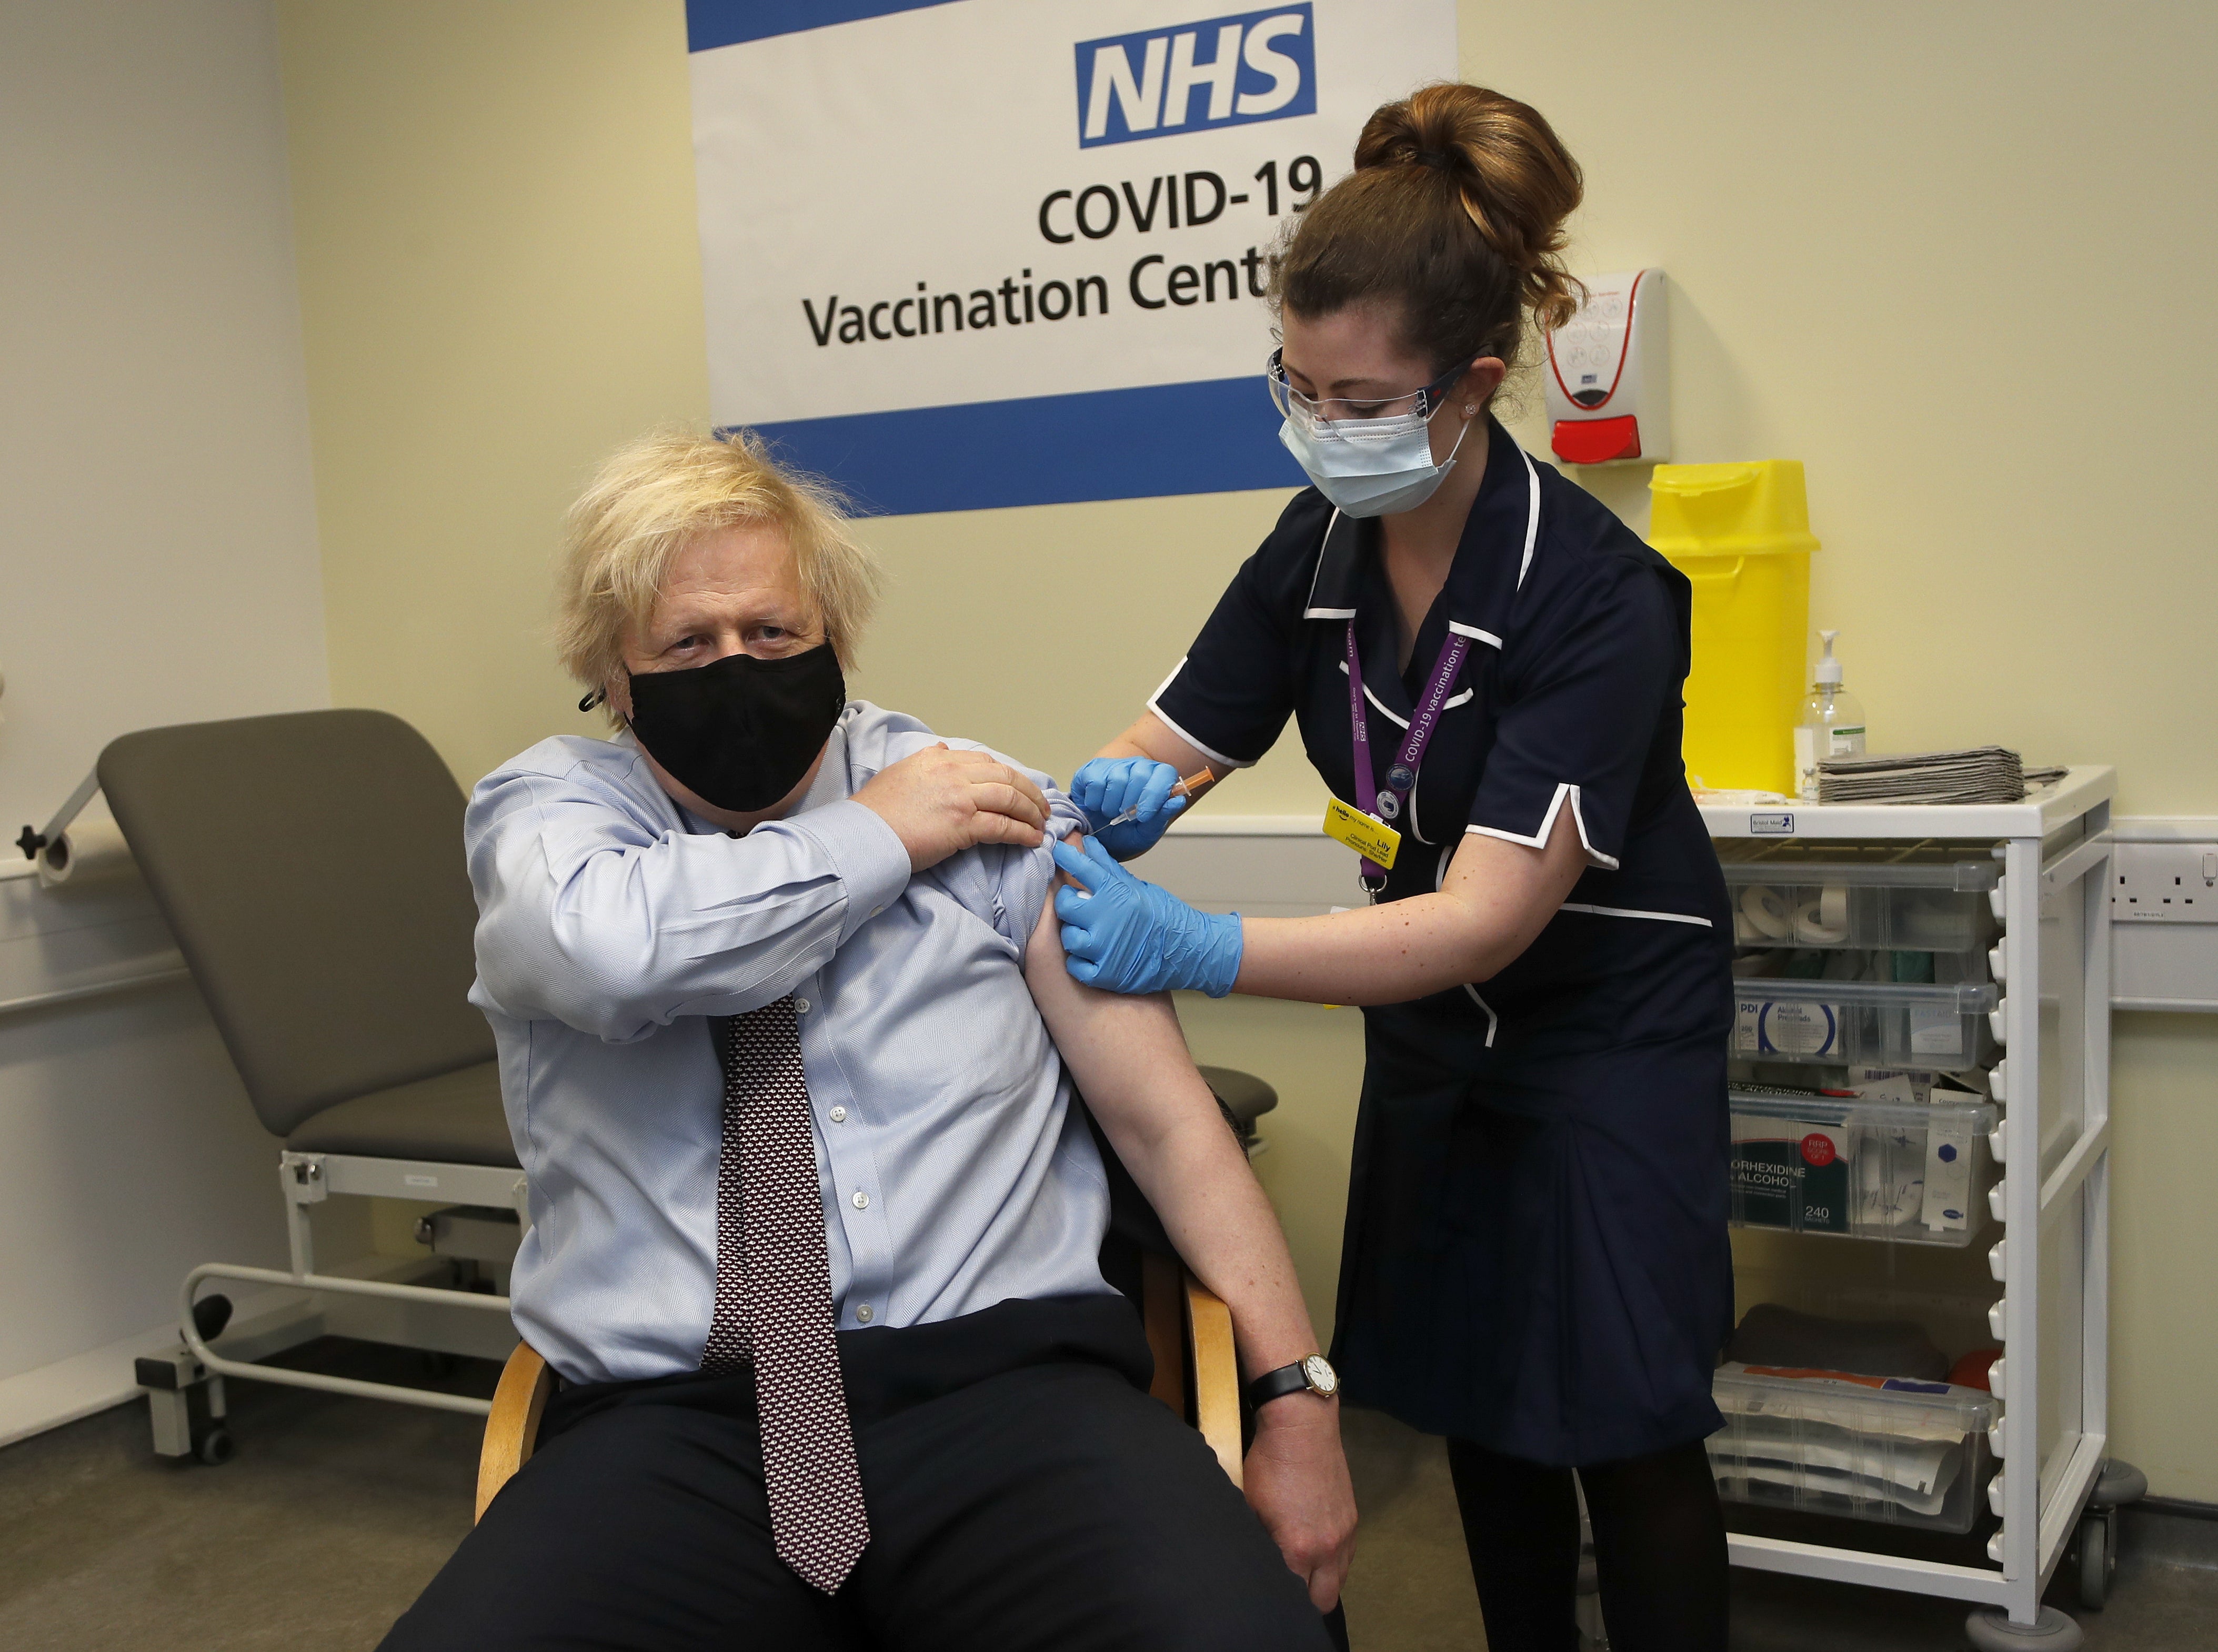 Prime Minister Boris Johnson said the vaccination drive was the best way out of the restrictions, as he urged people to come forward when called to be jabbed (Frank Augstein/PA)